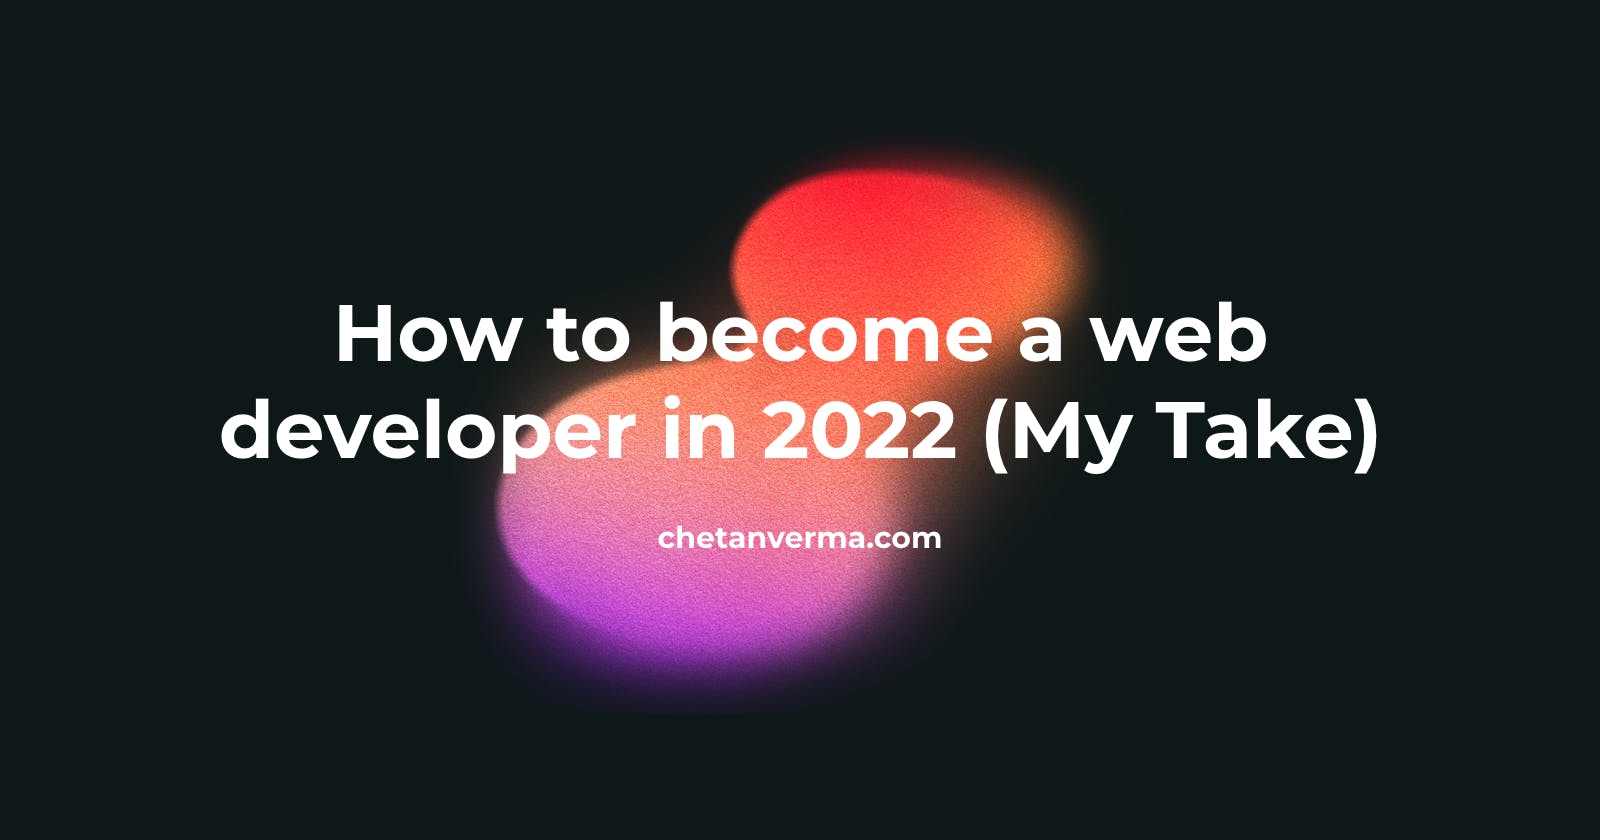 How to become a web developer in 2022 (My Take)